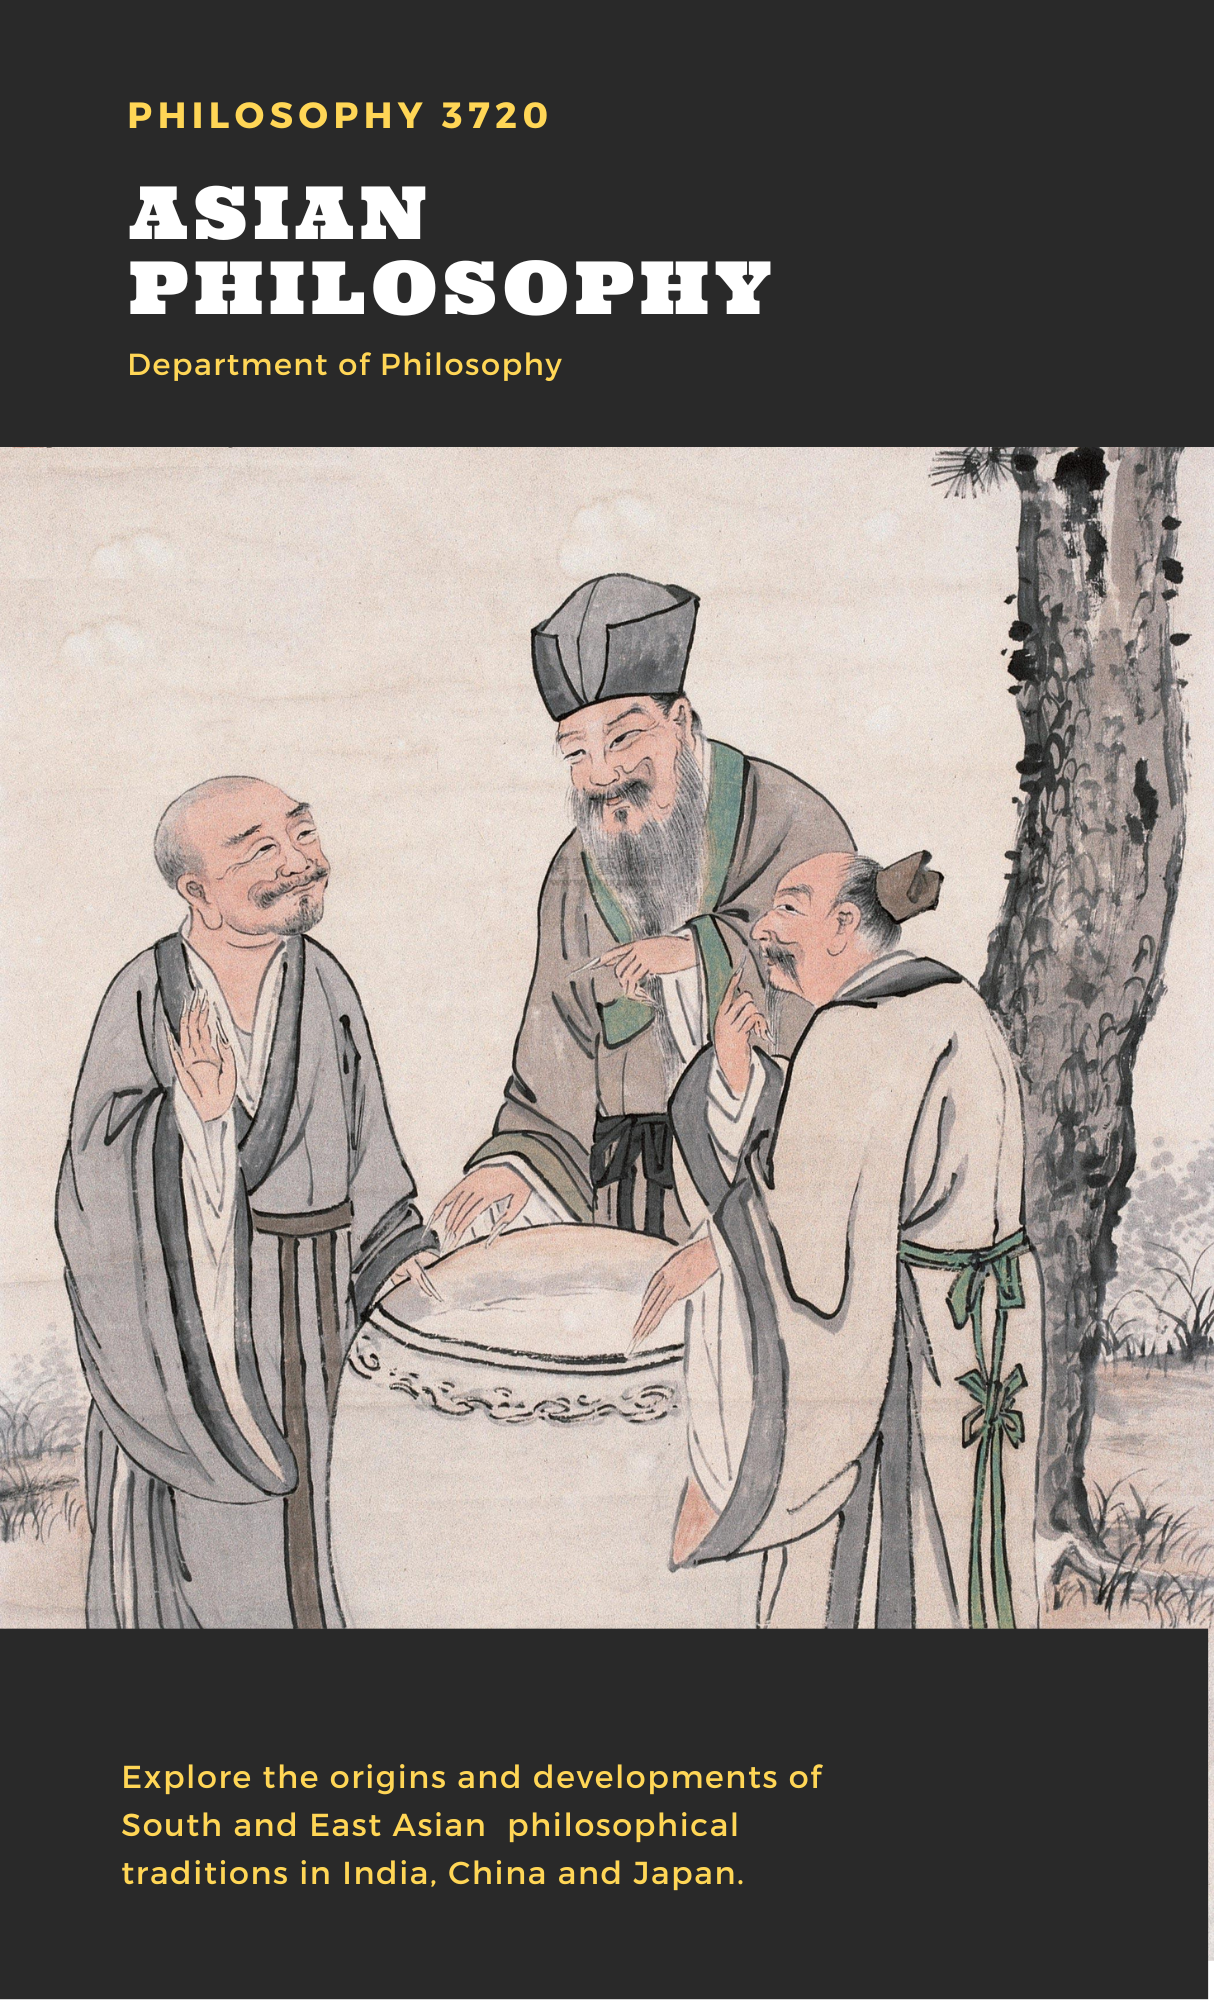 Asian Philosophy Poster